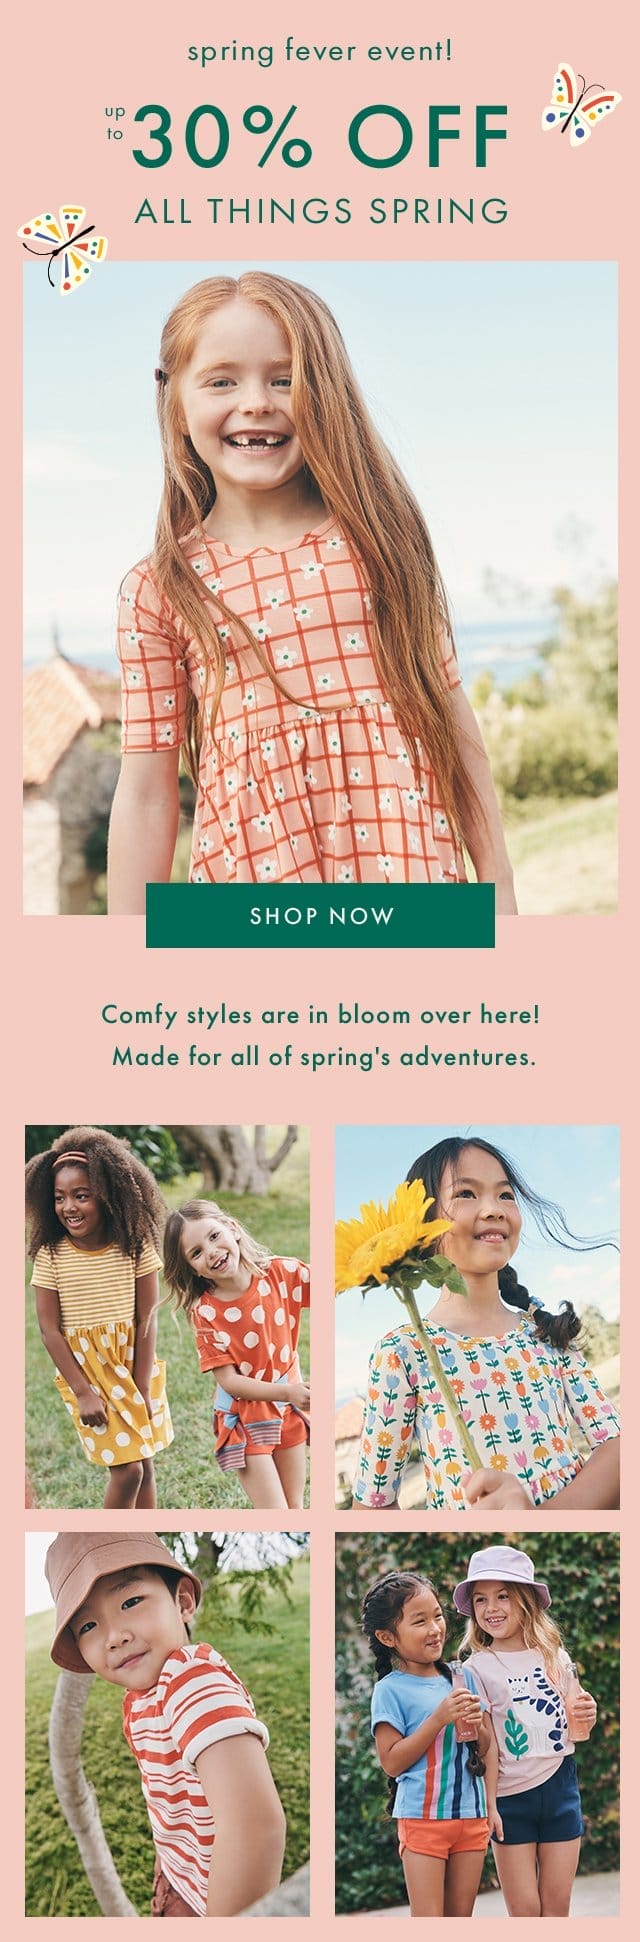 spring fever event! | up to 30% OFF ALL THINGS SPRING | SHOP NOW | Comfy styles are in bloom over here! Made for all of spring's adventures.